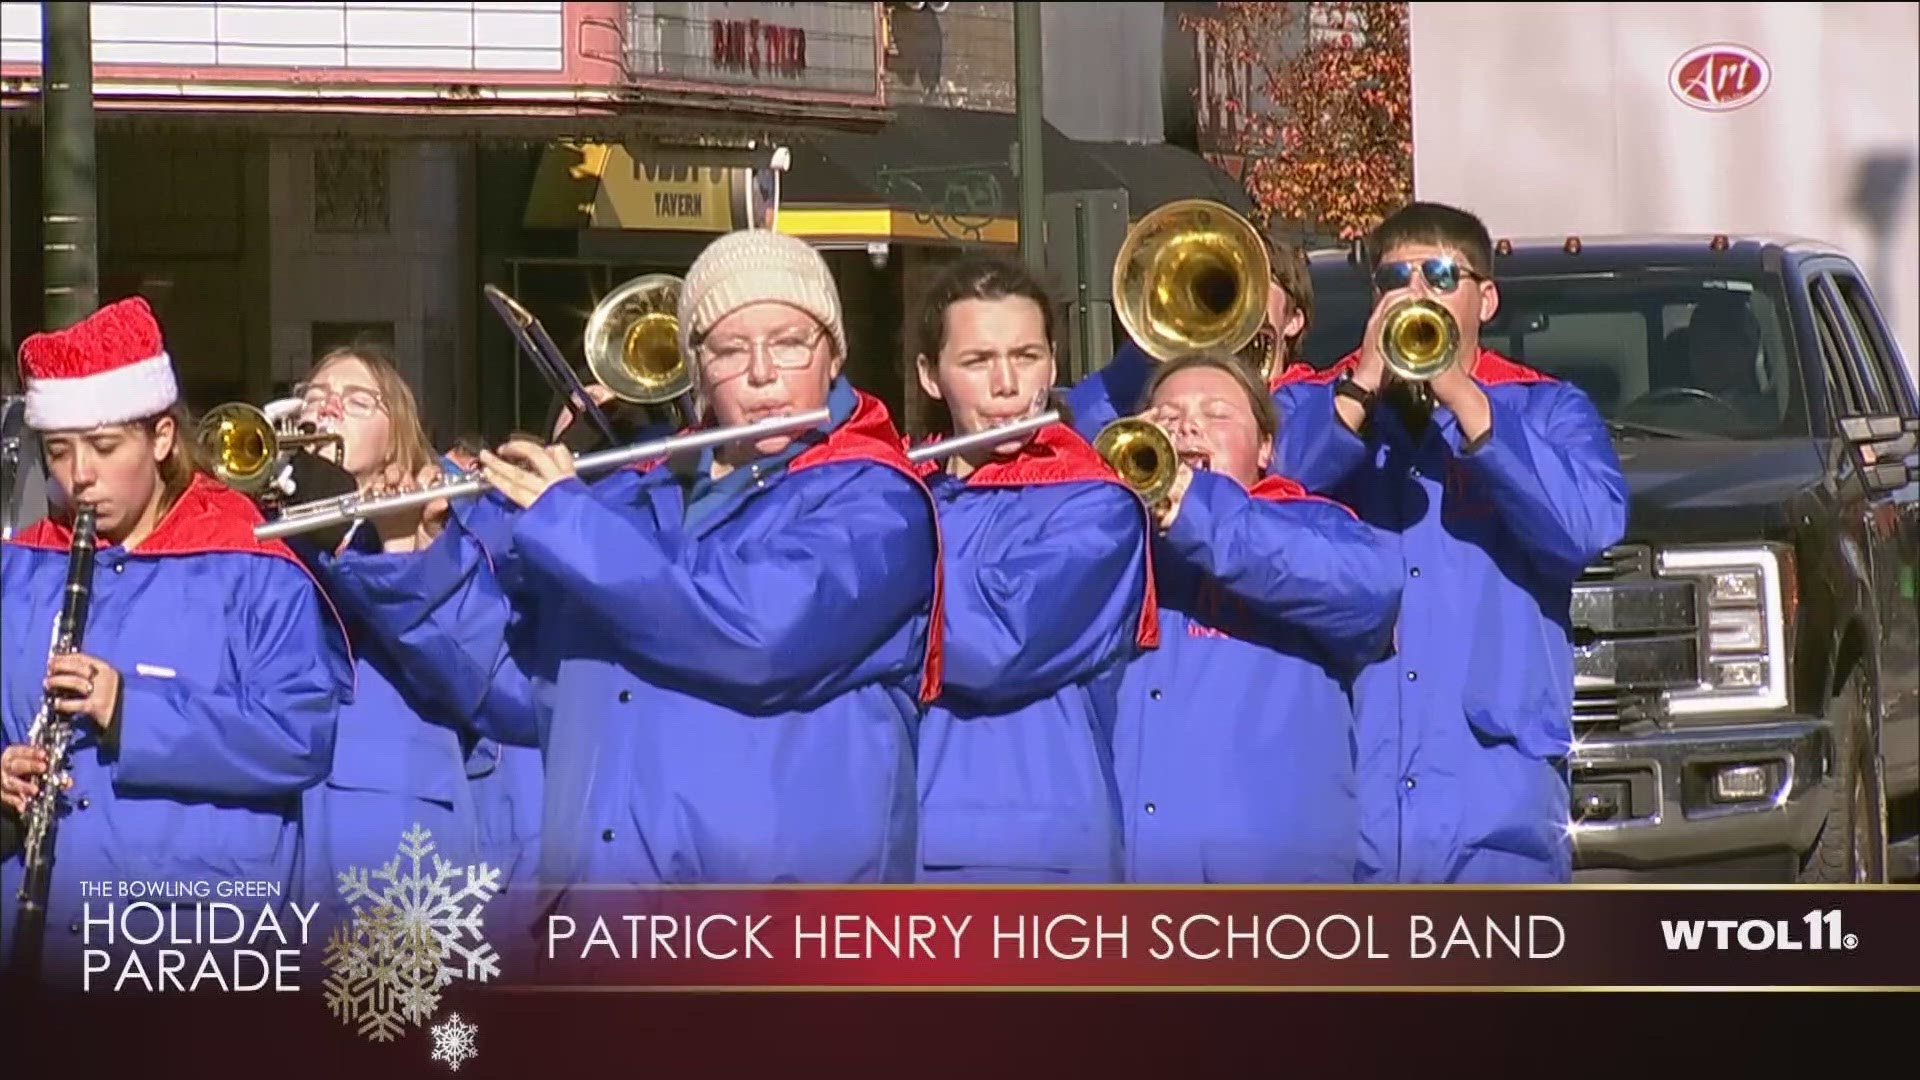 Students from Patrick Henry High School perform in the marching band.